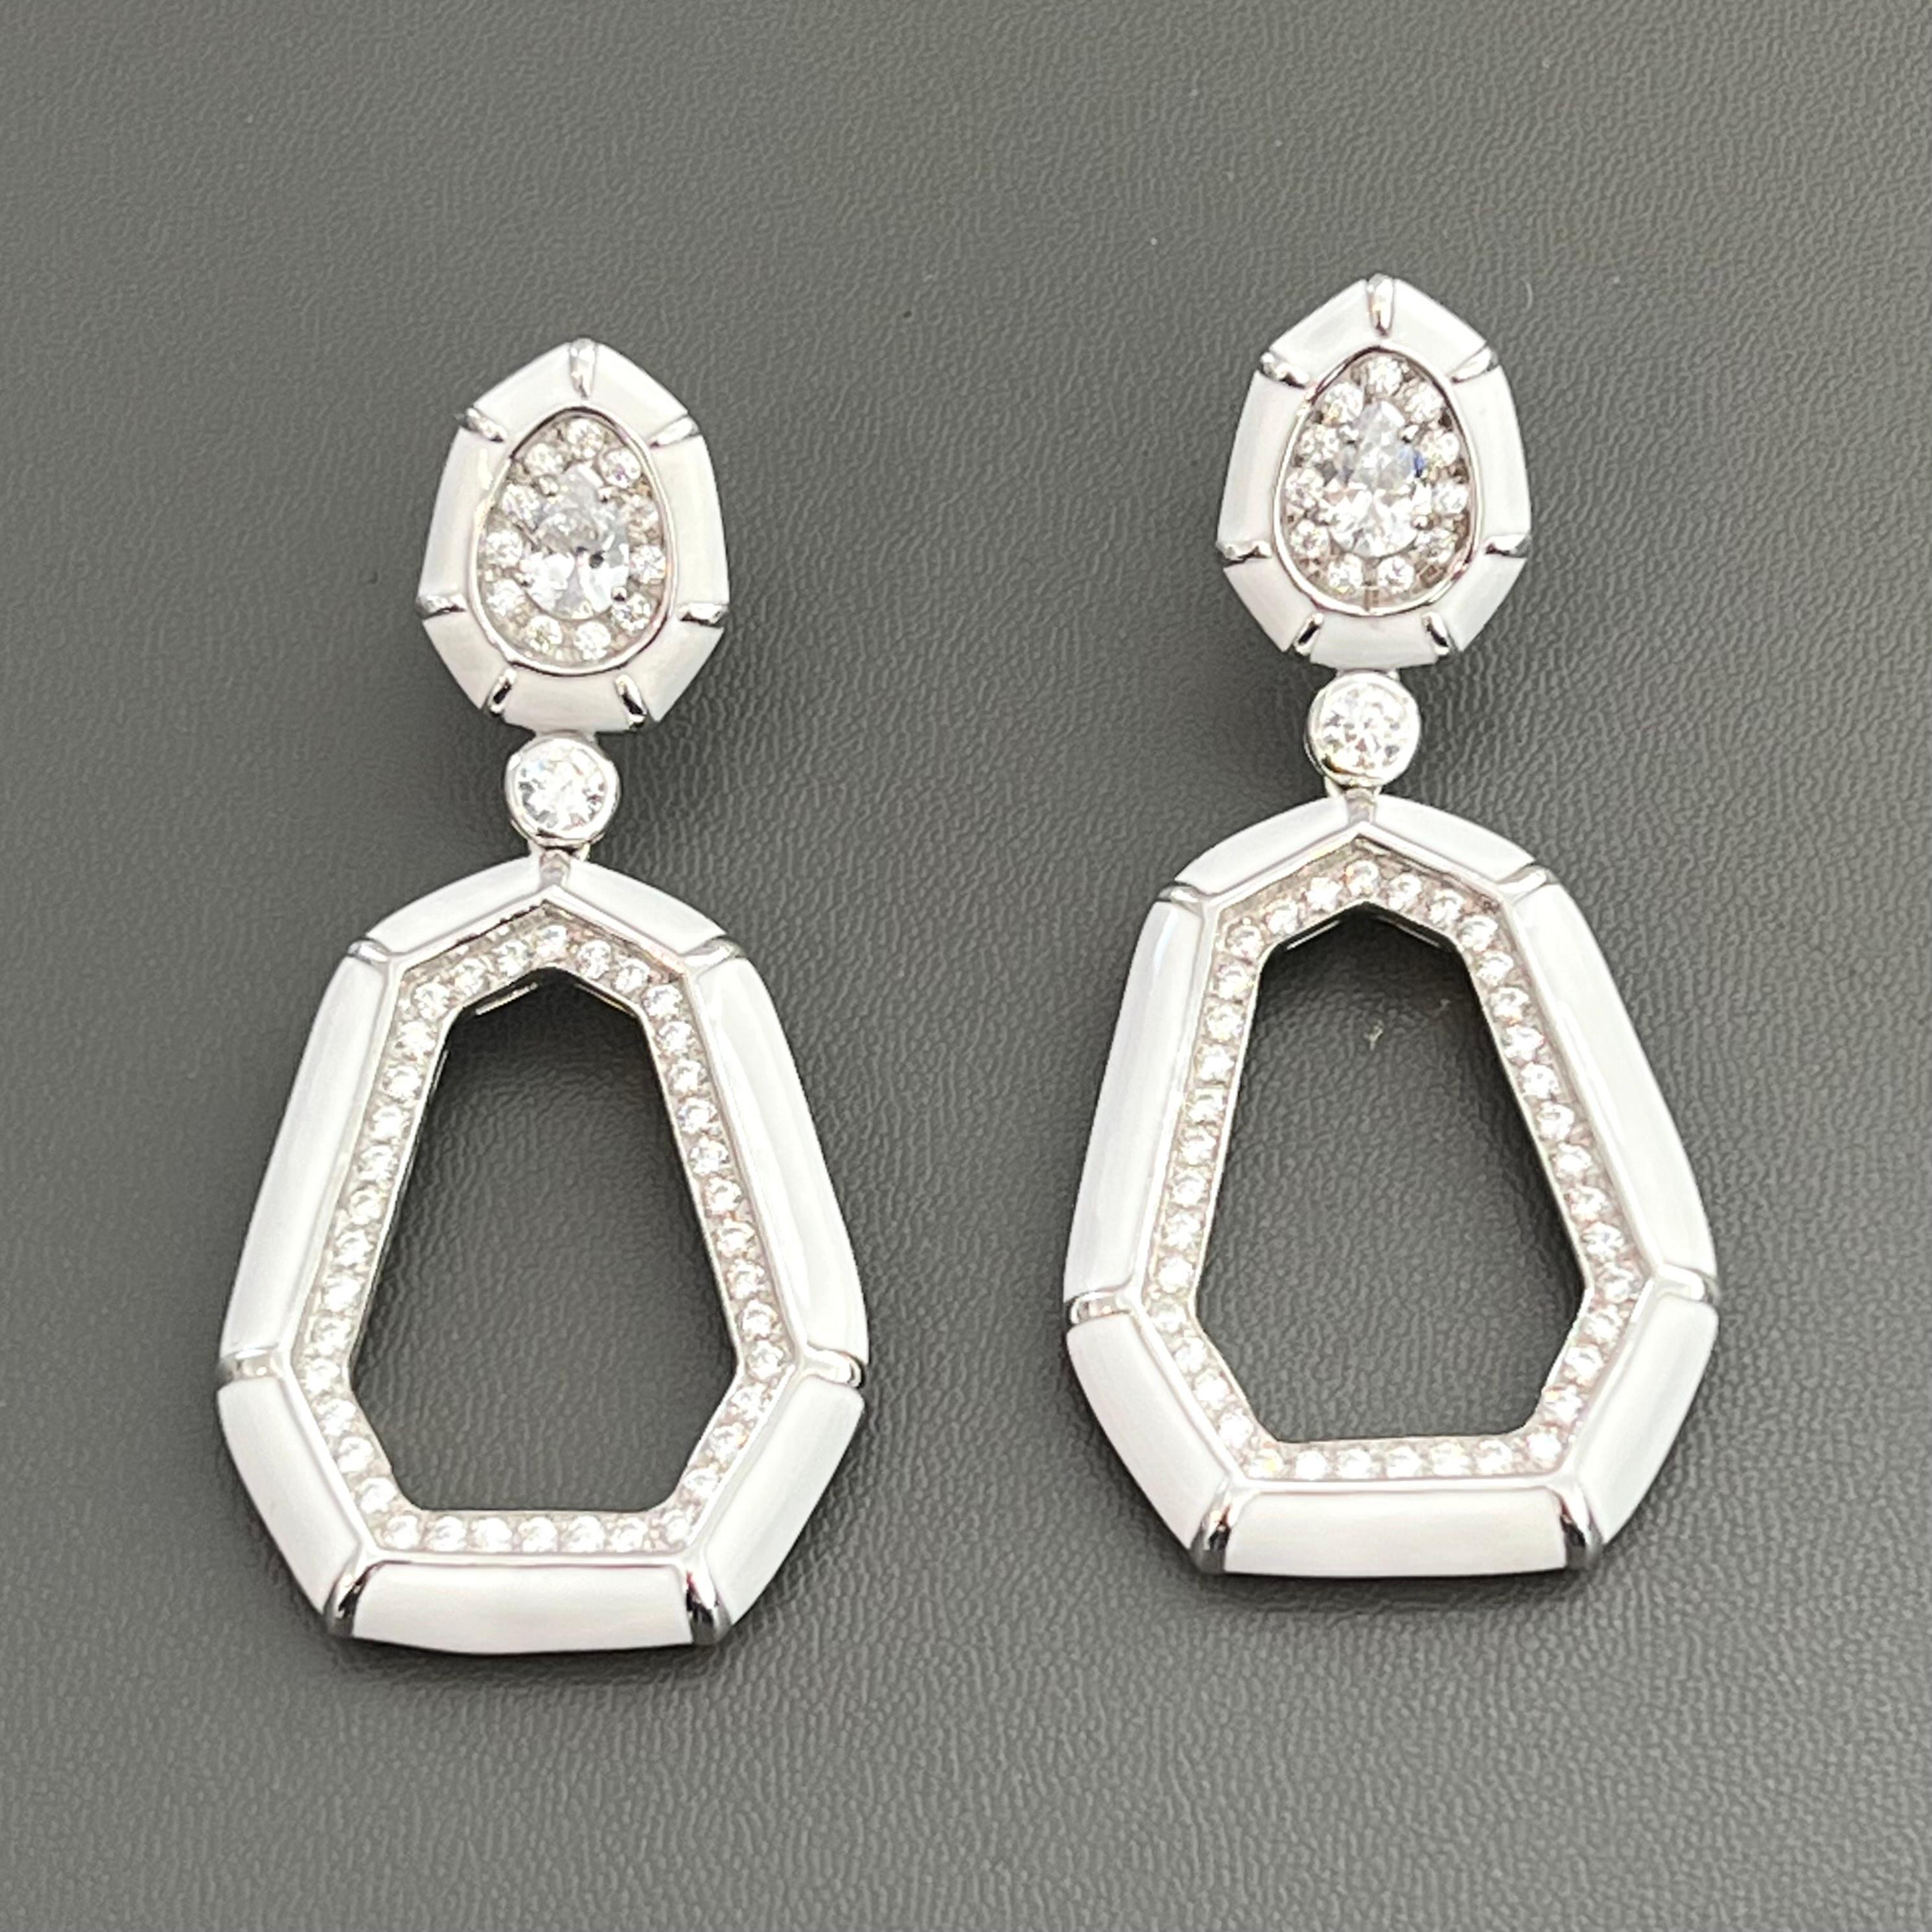 Stunning White Enamel Septagon Door Knocker earrings. Handset with round and pear shape simulated diamonds on platinum rhodium plated over sterling silver and finished with shiny white enamel. The earrings are 2-1/2